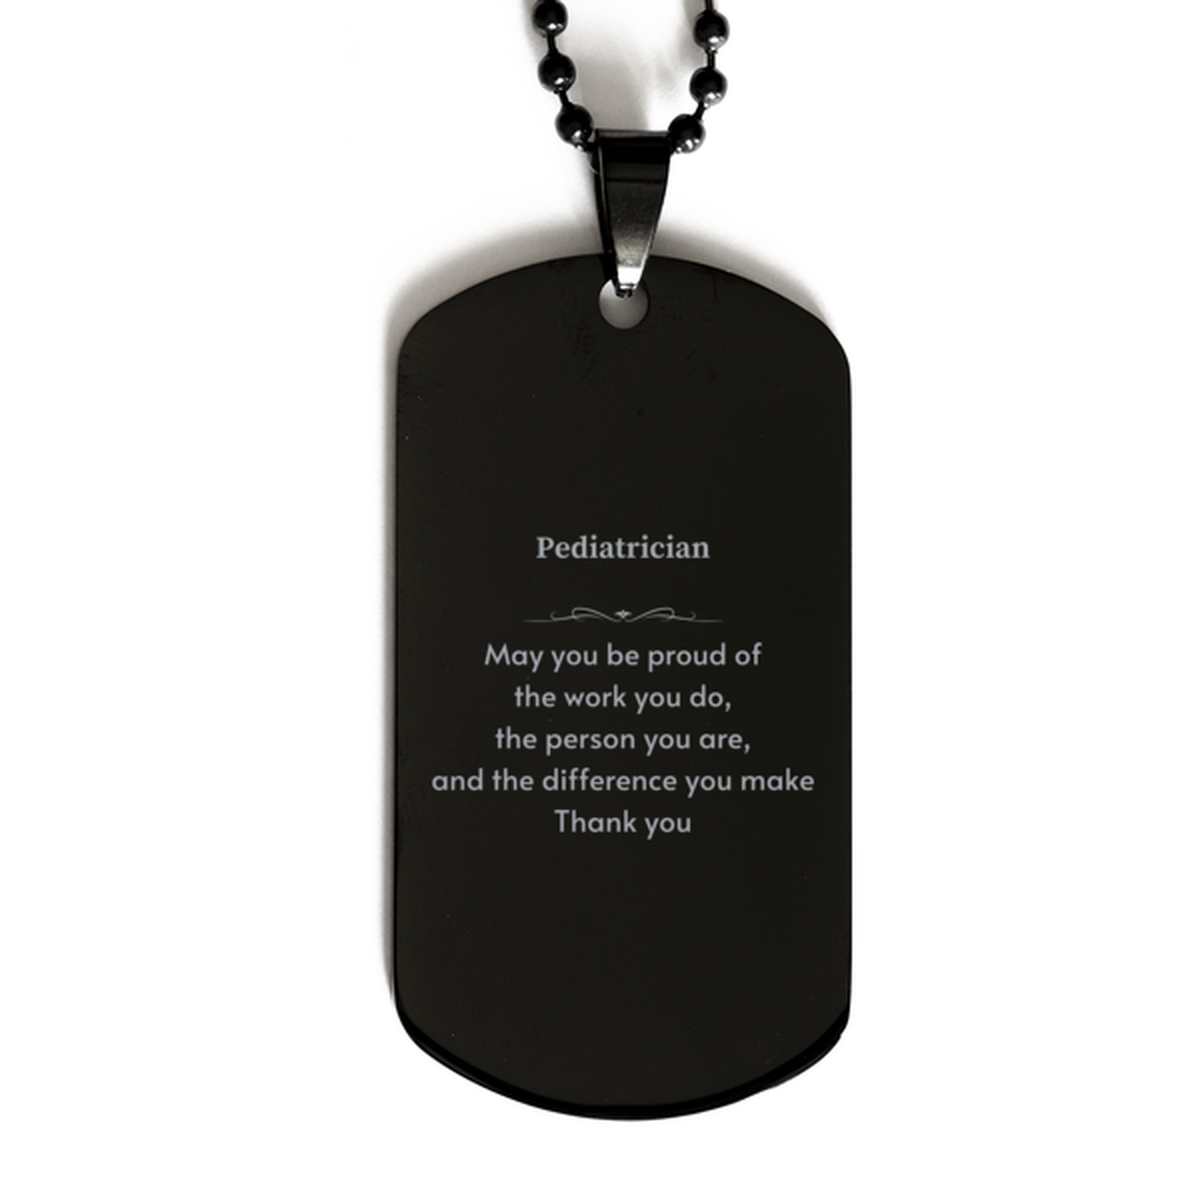 Heartwarming Black Dog Tag Retirement Coworkers Gifts for Pediatrician, Pediatrician May You be proud of the work you do, the person you are Gifts for Boss Men Women Friends